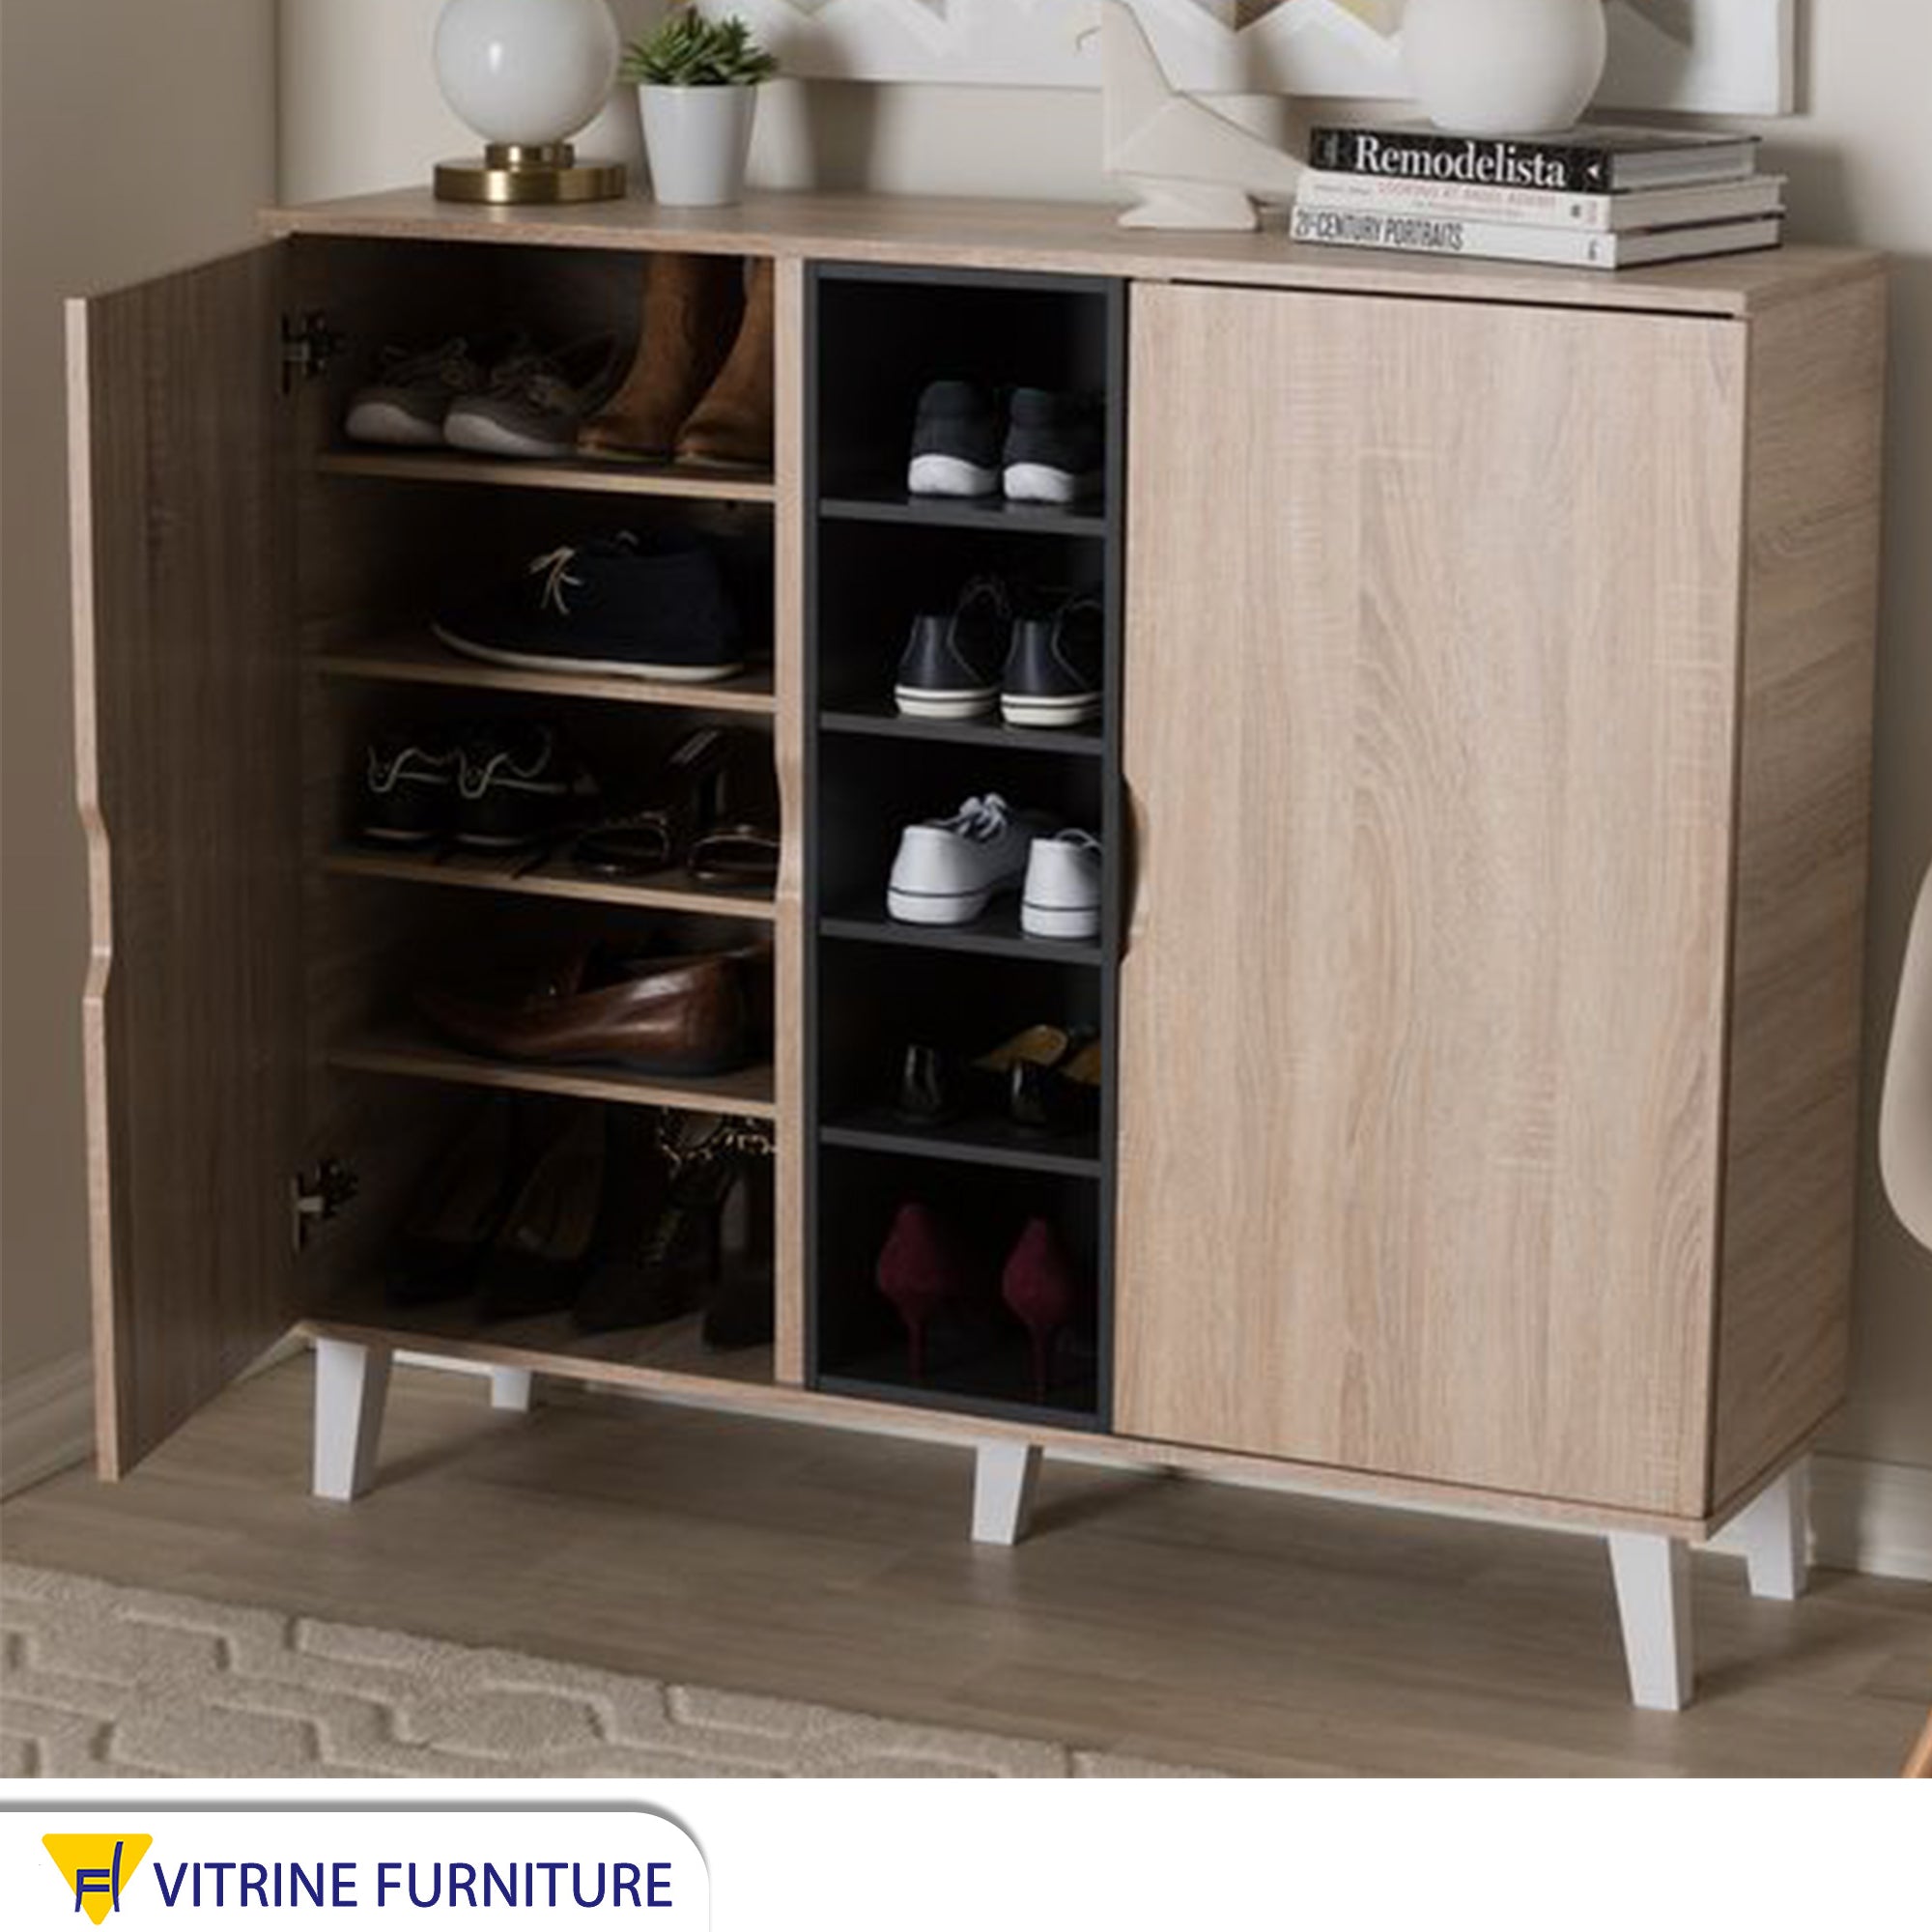 Beige wooden Shoe rack with white legs